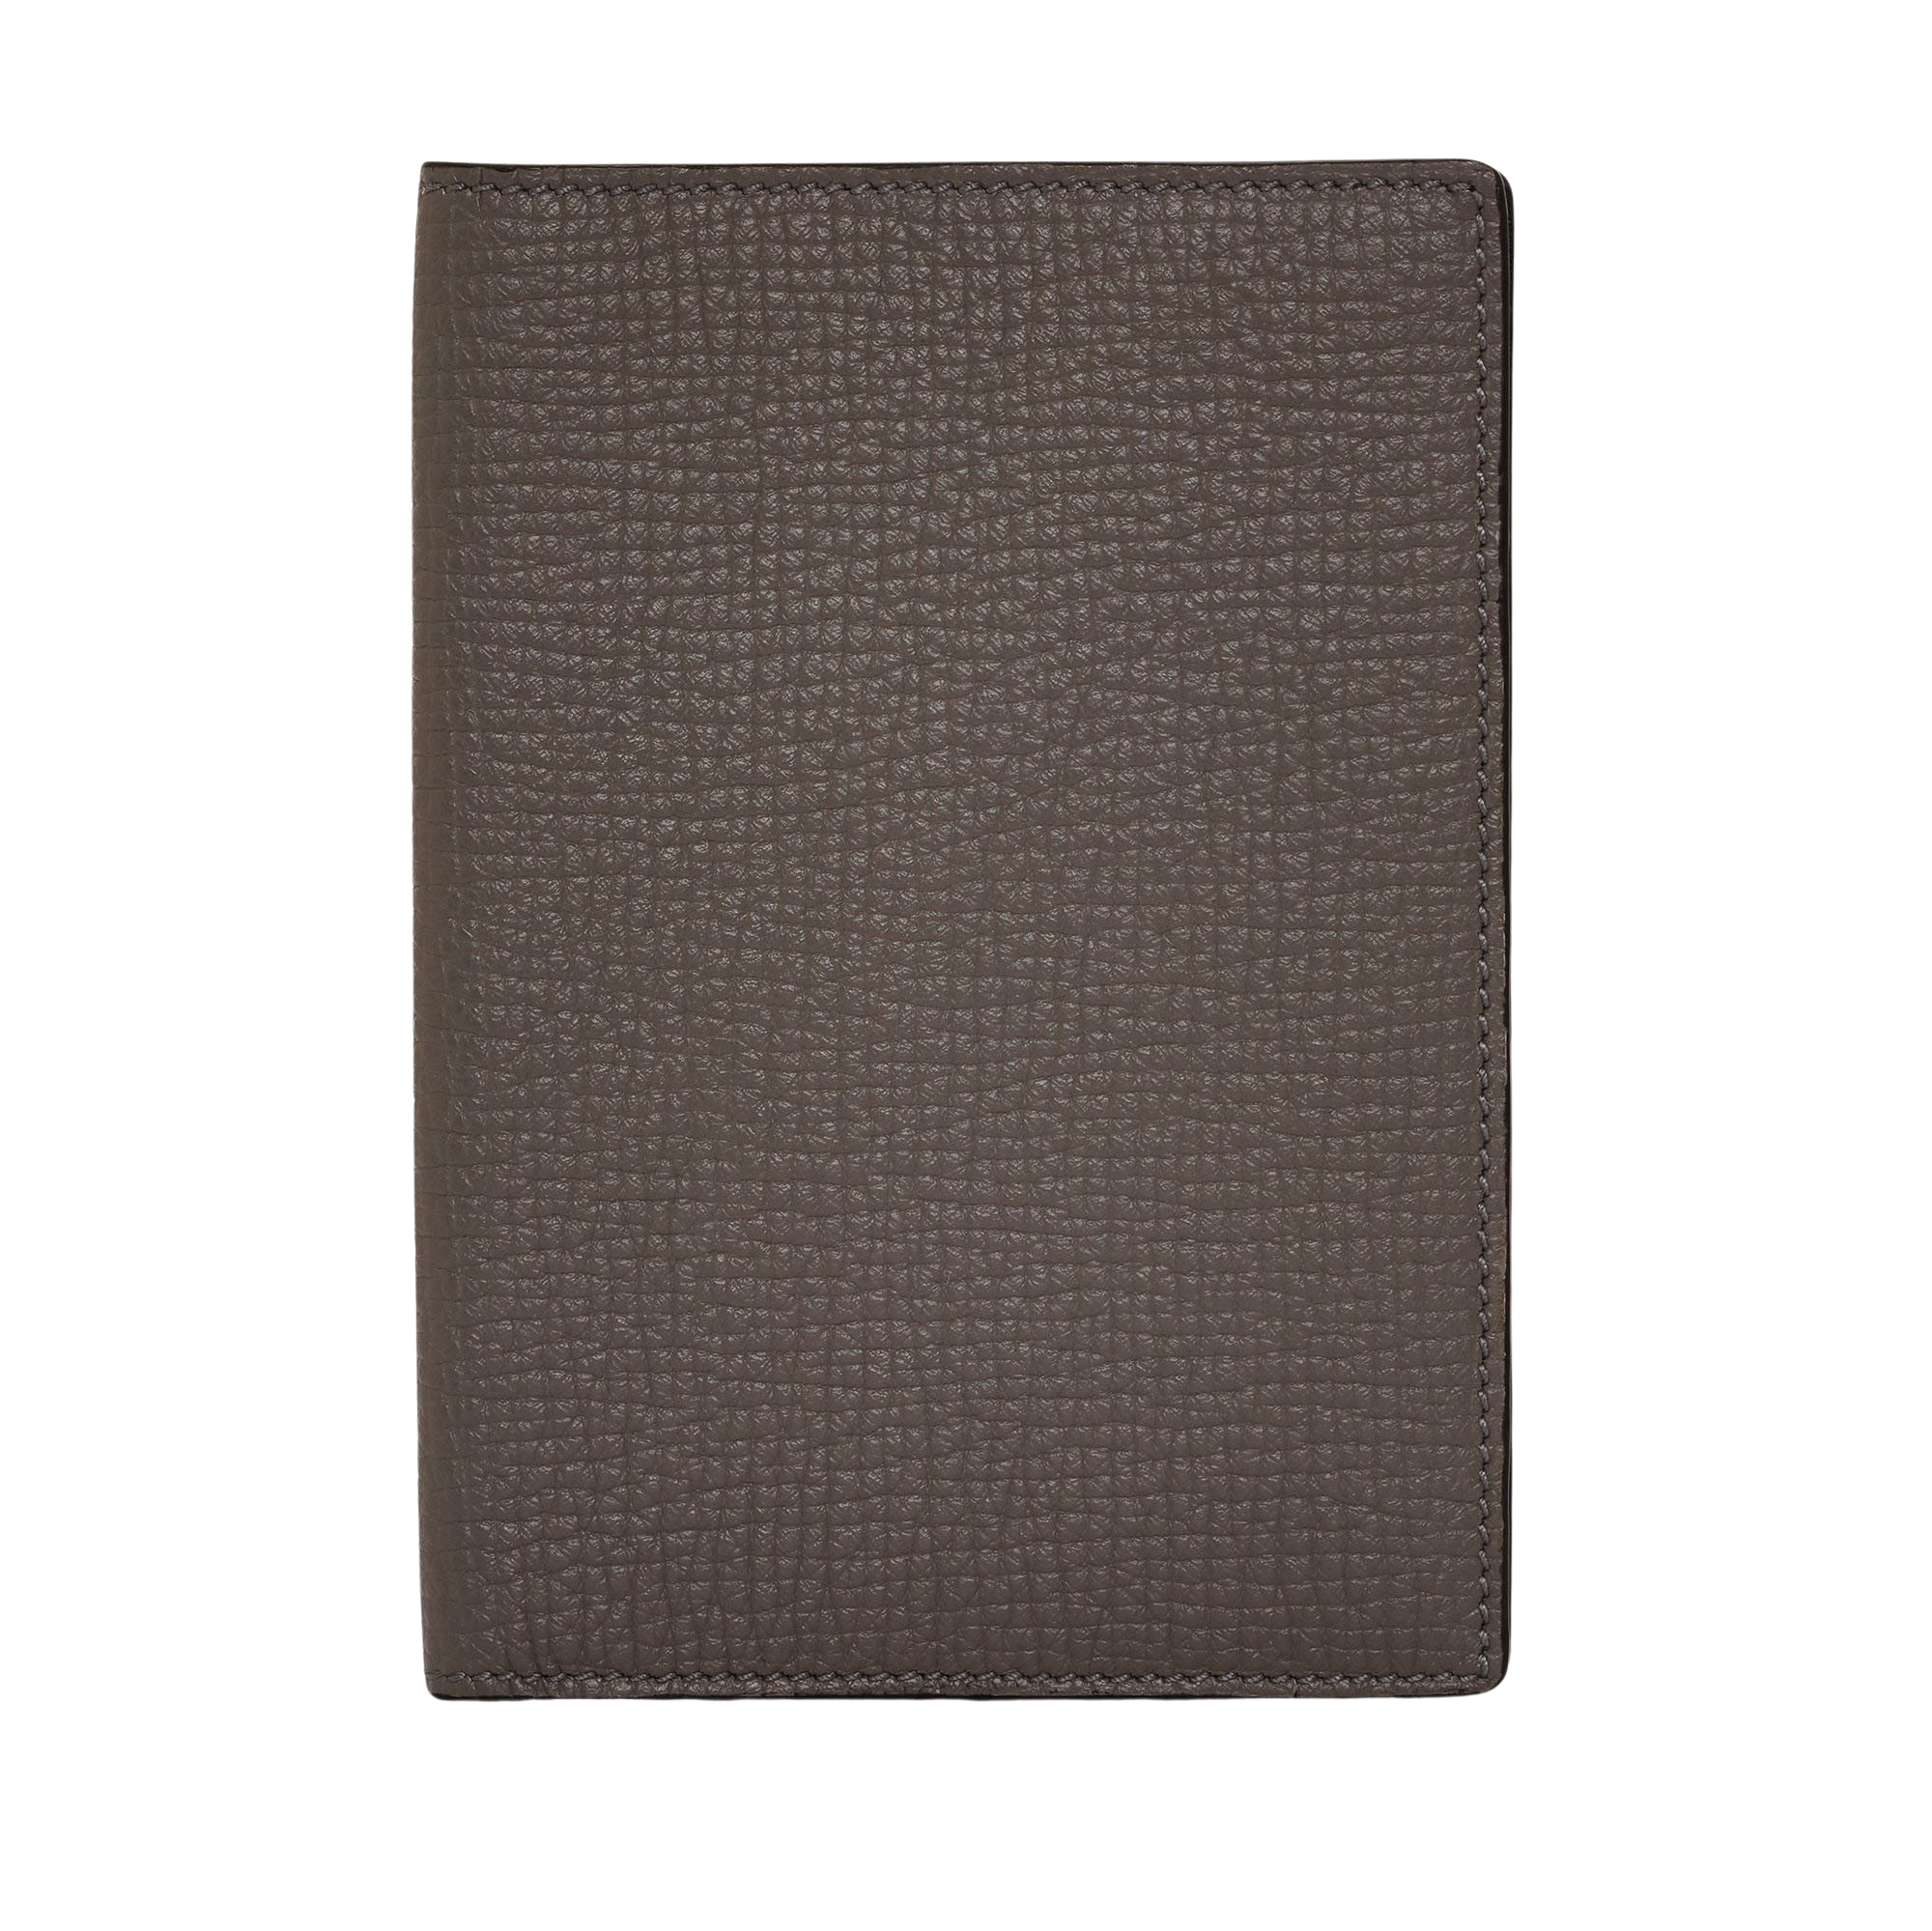 Smythson Taupe Brown Ludlow Leather Passport Cover Feature